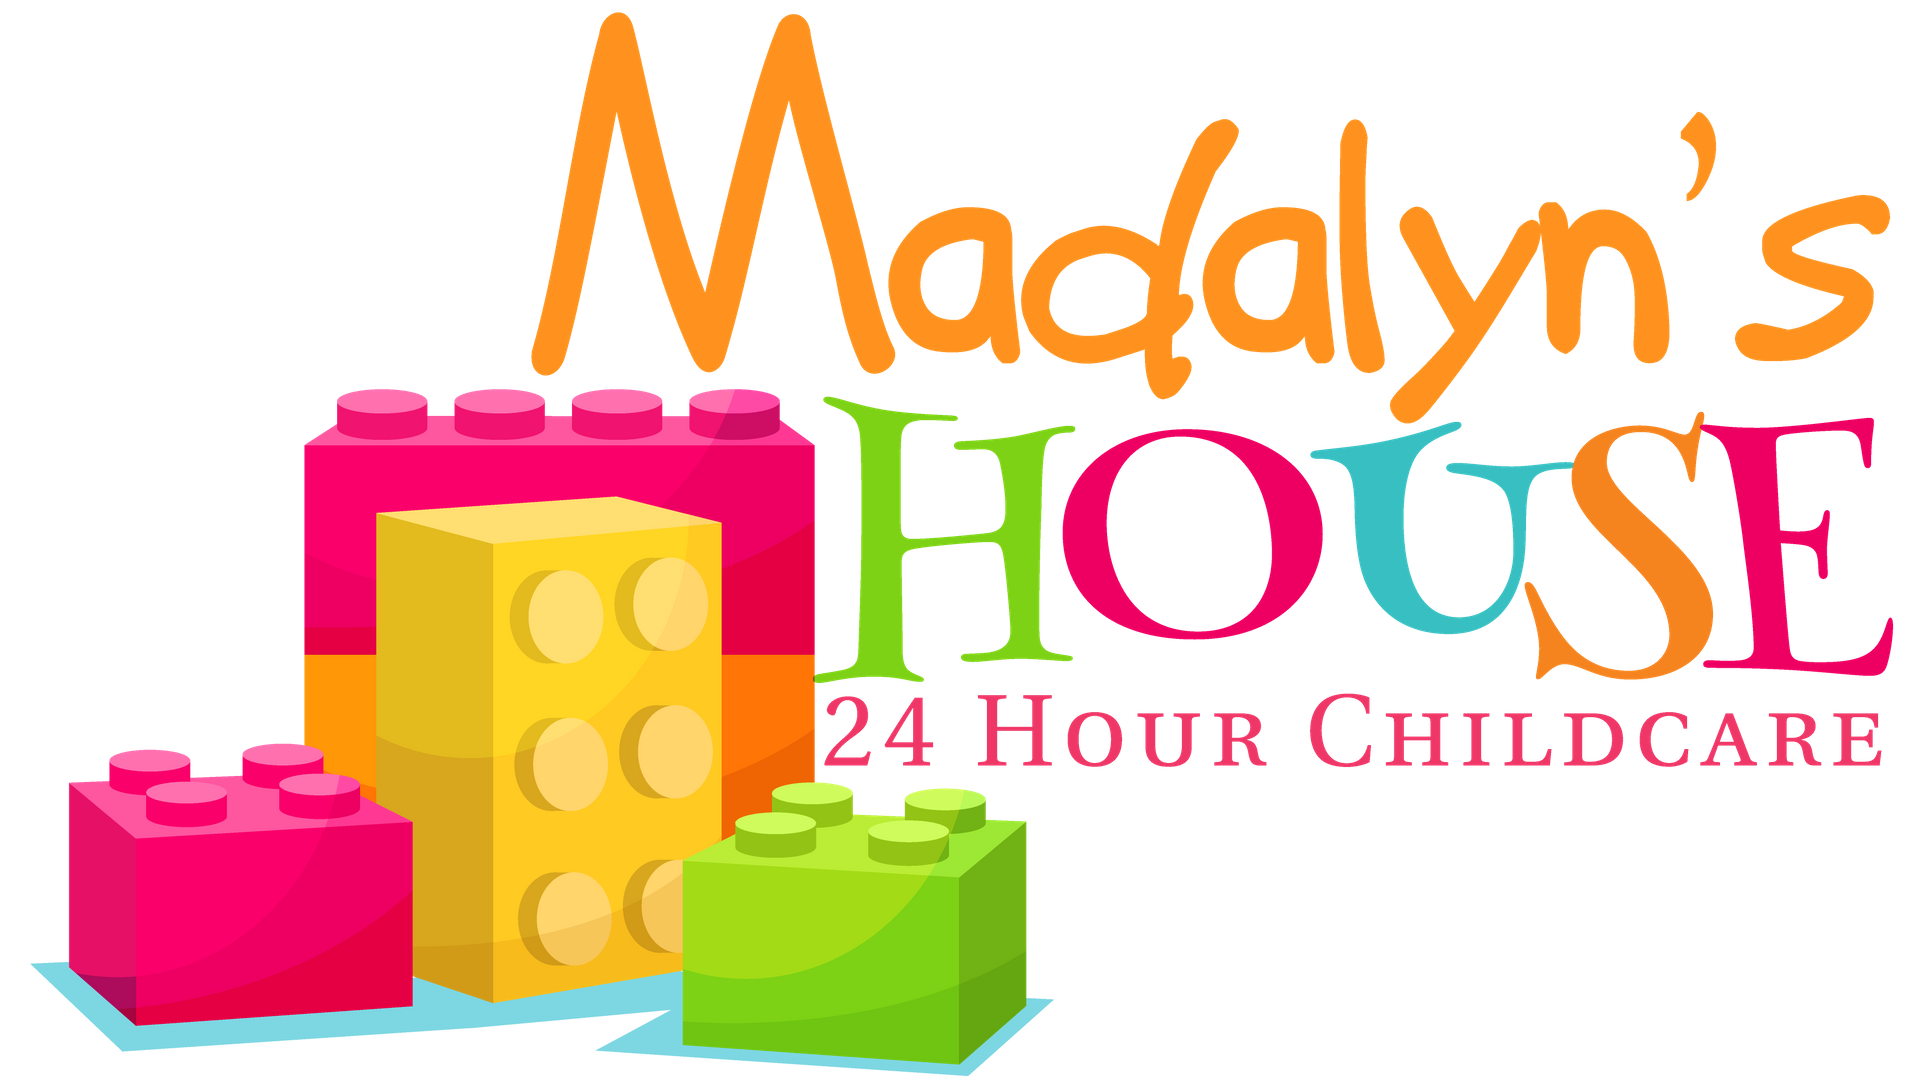 Madalyn's House Childcare